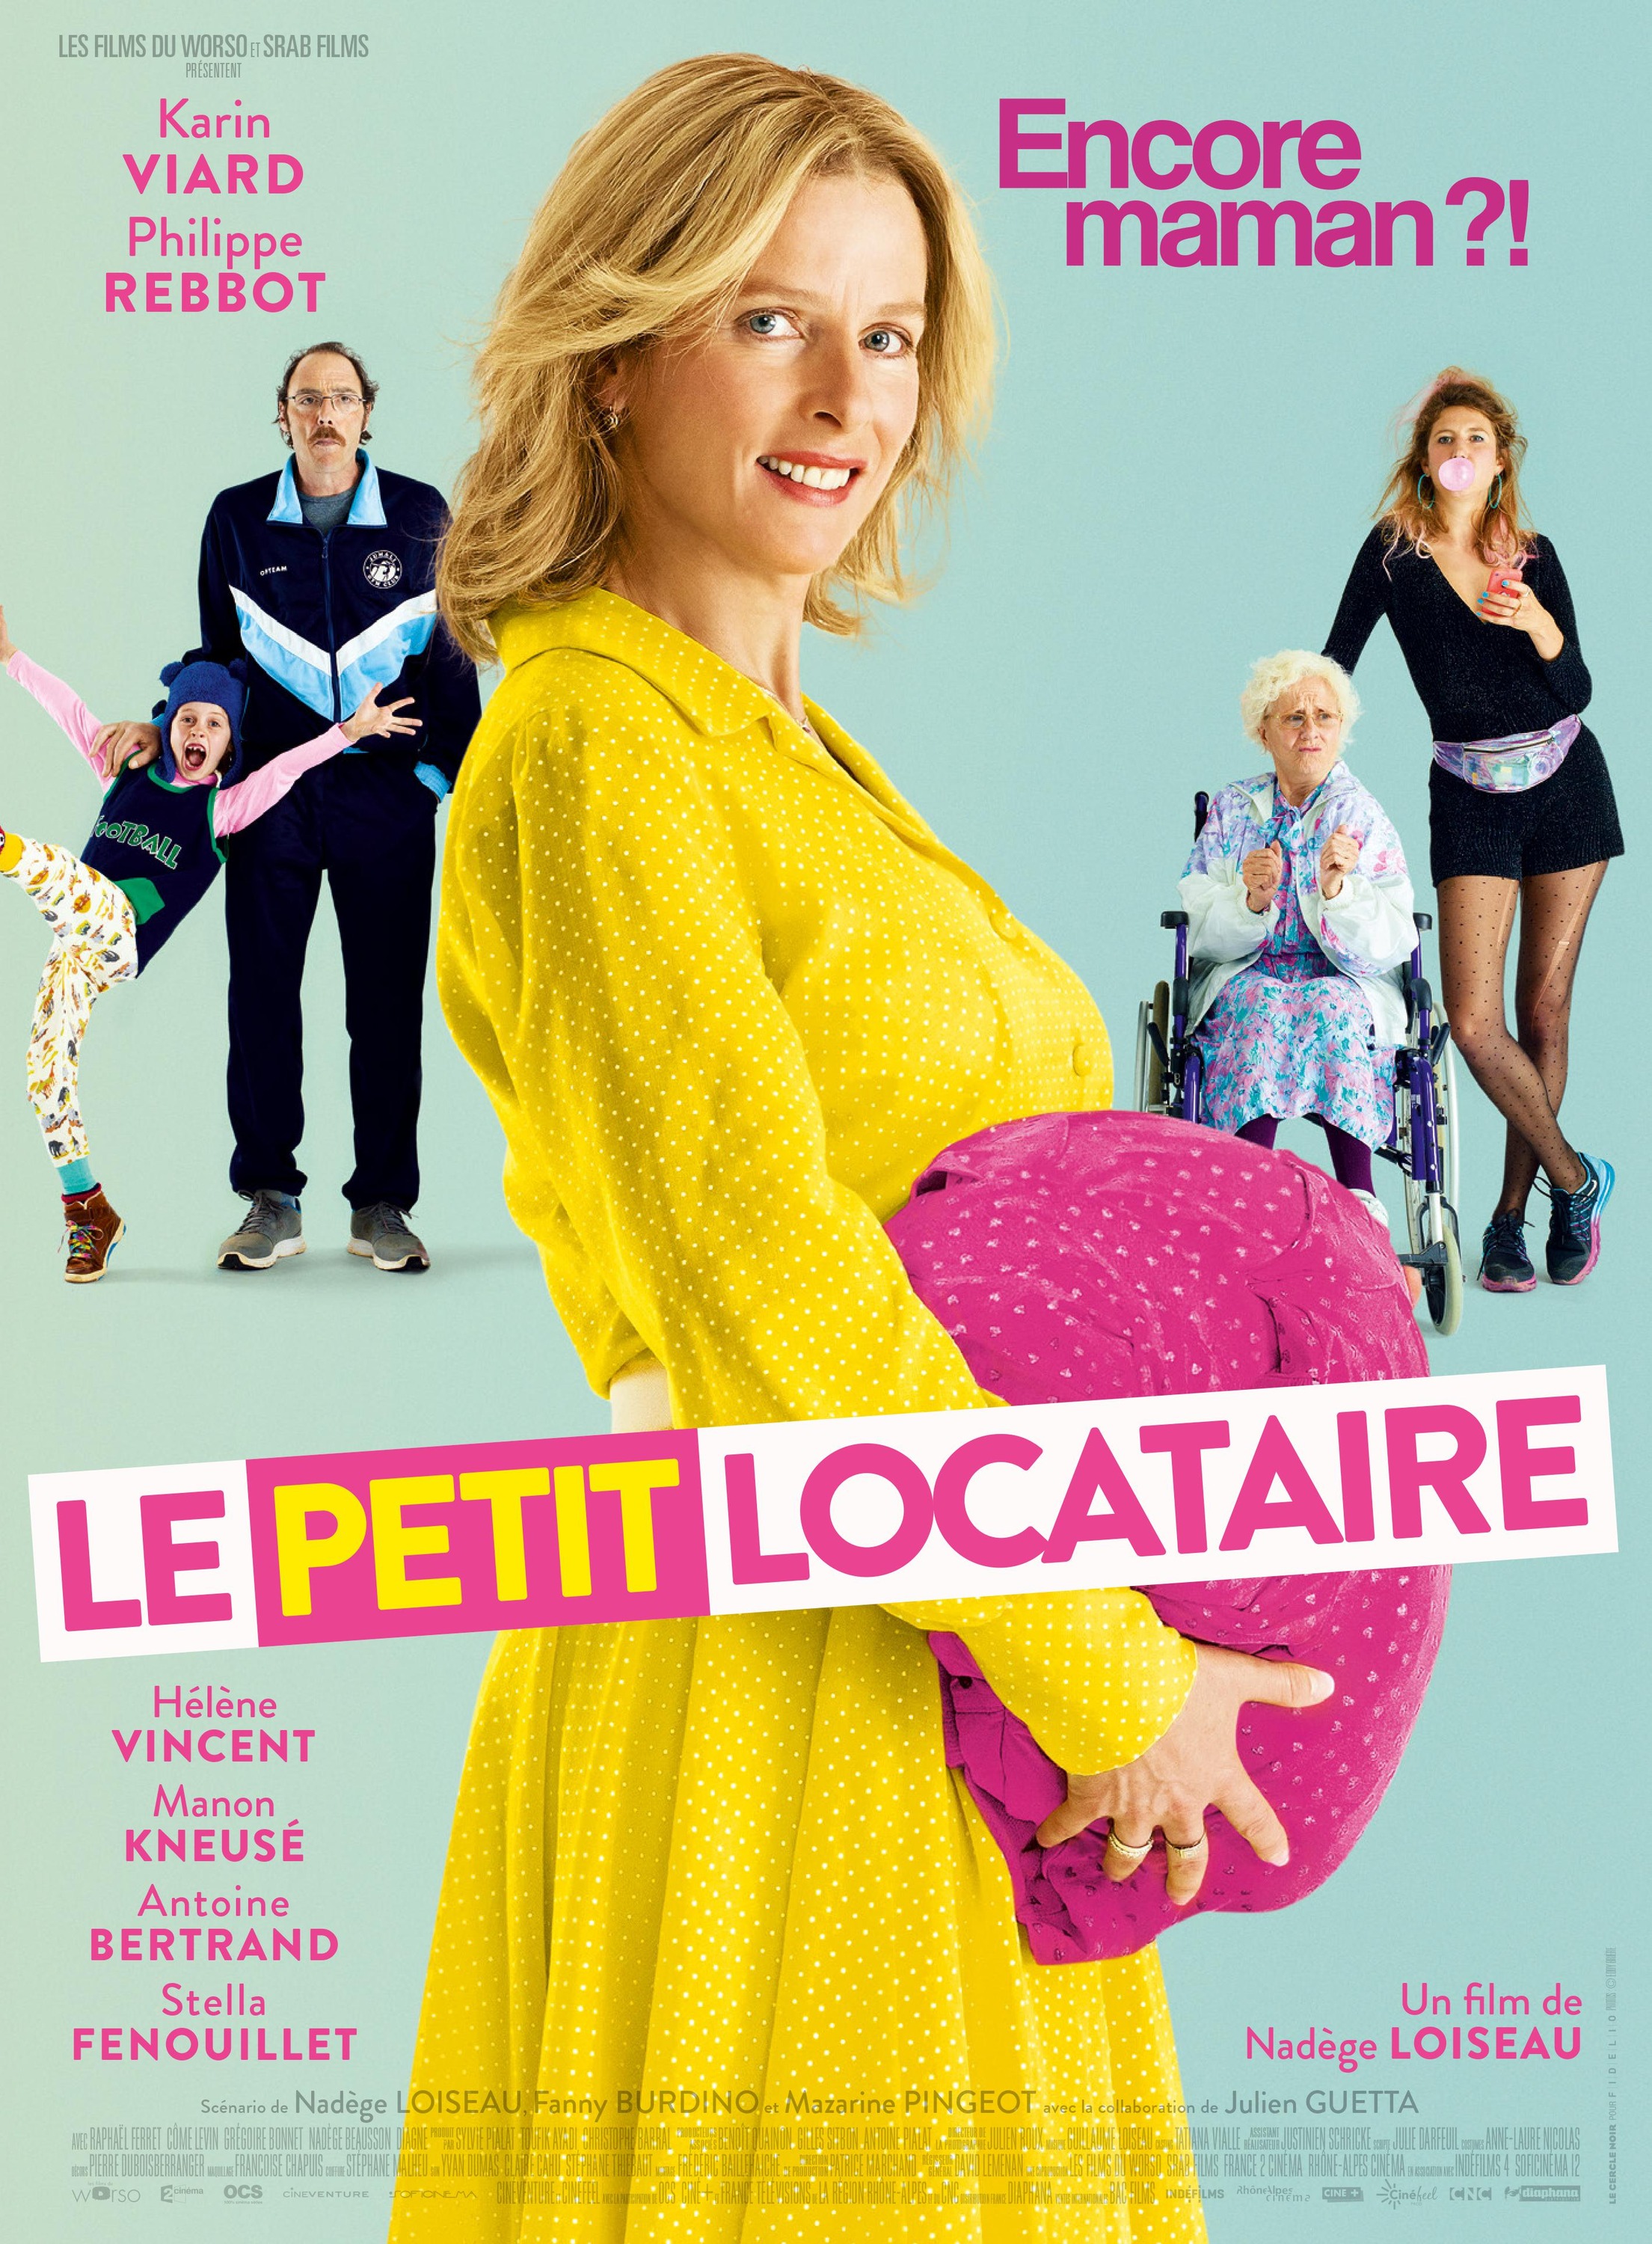 Mega Sized Movie Poster Image for Le petit locataire 